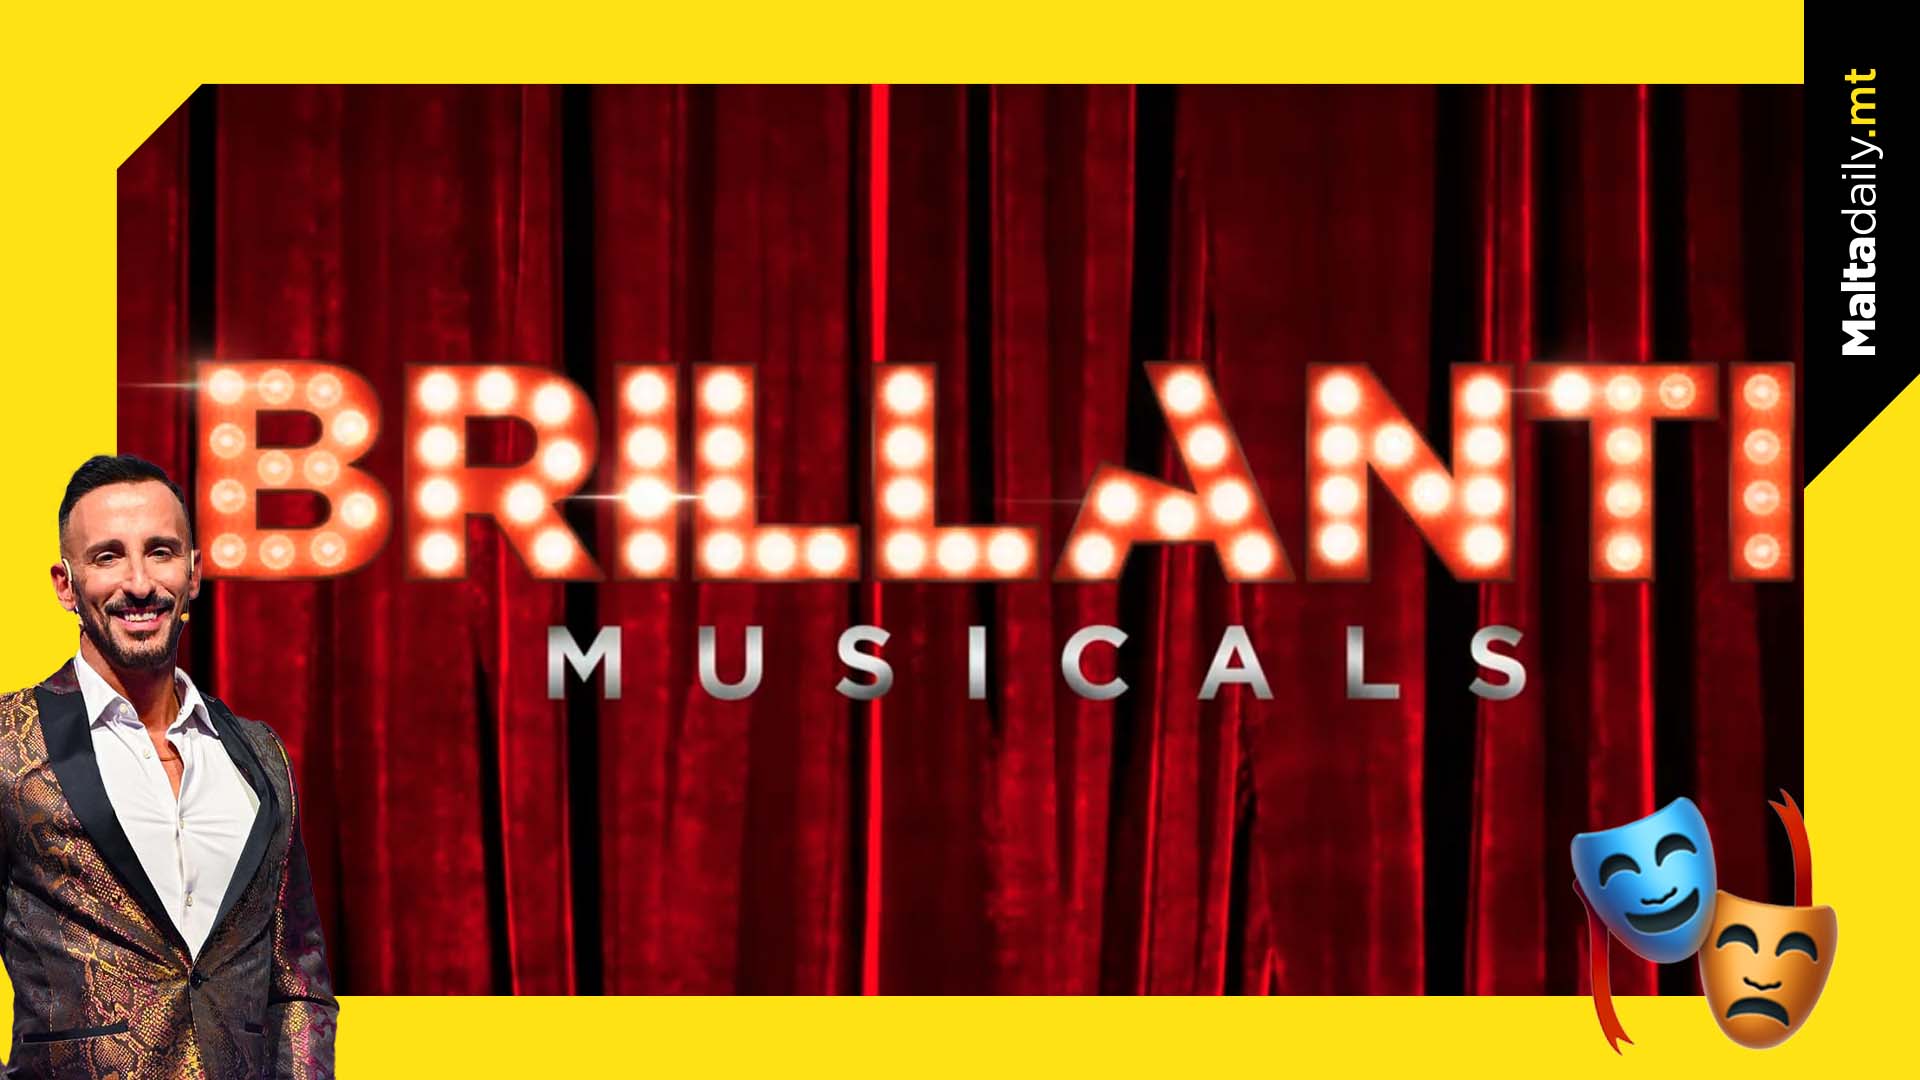 Applications now open for Brillanti Goes Musical Theatre